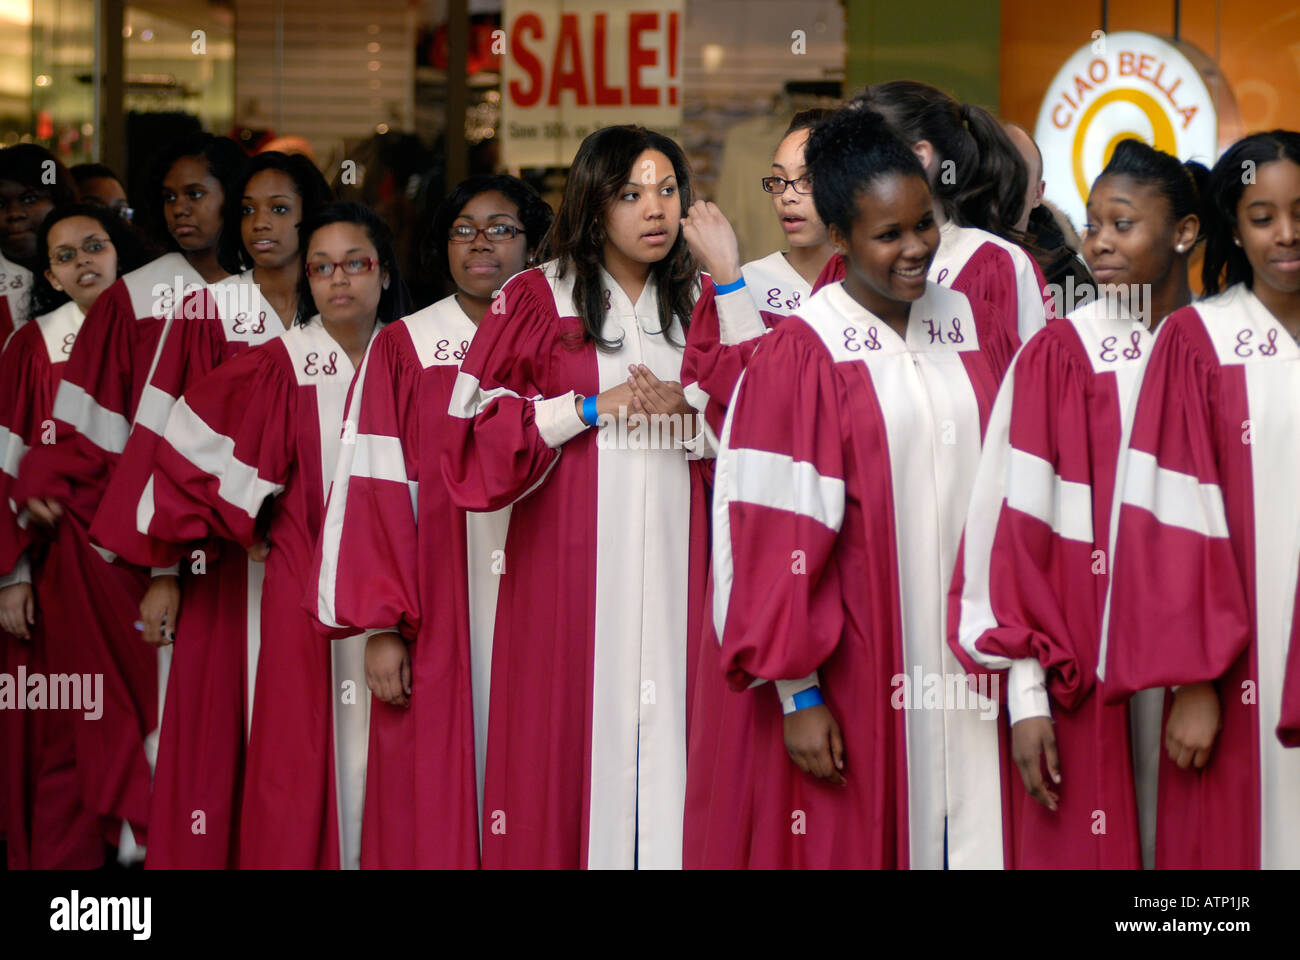 Top choirs from around the country perform at the World Financial Center for the Pathmark Gospel Choir Competition Stock Photo